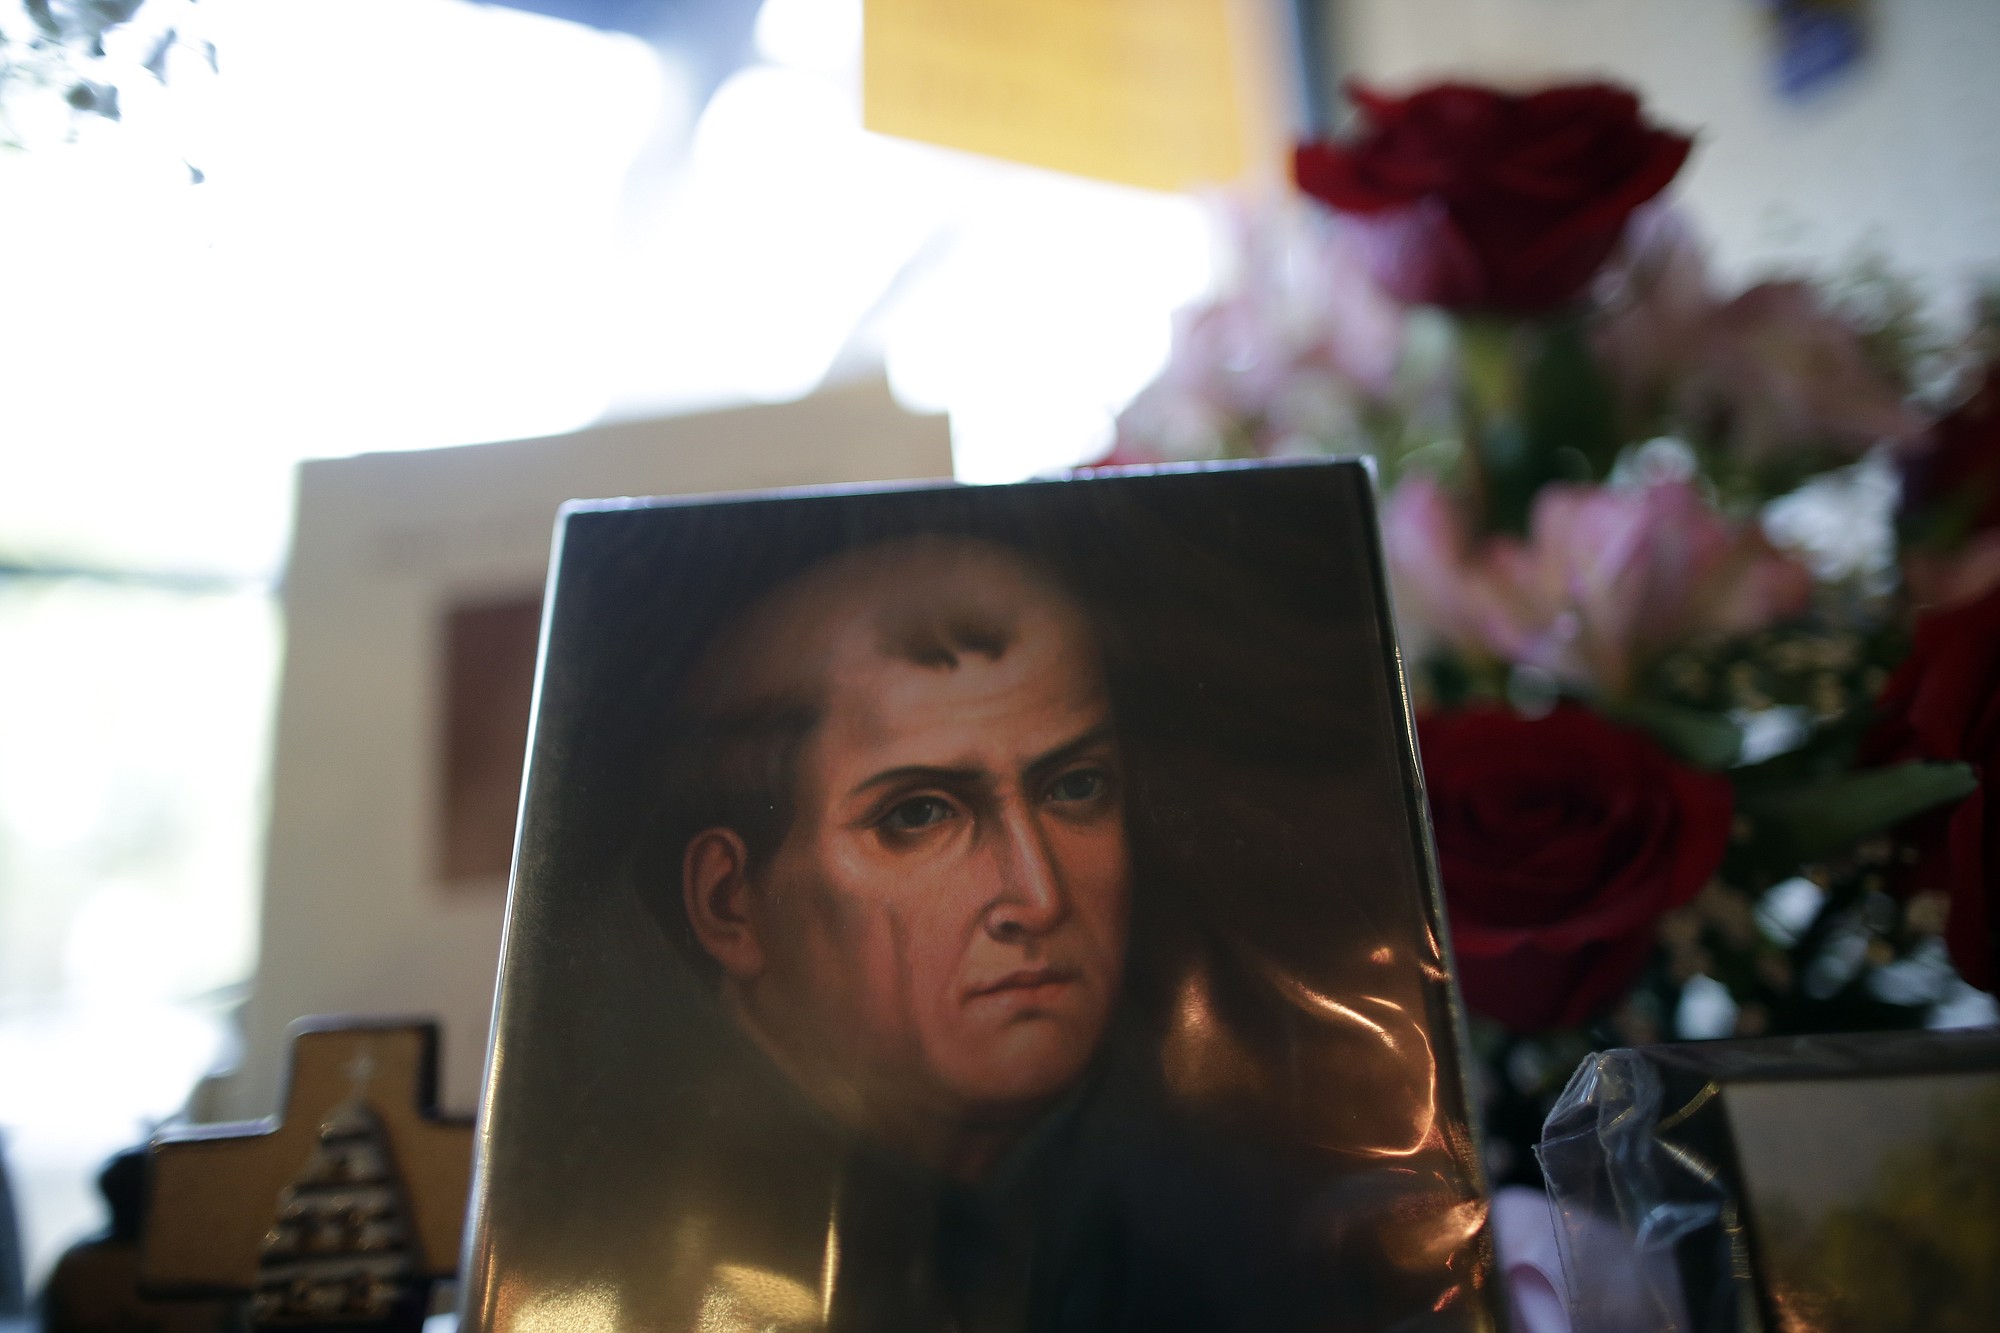 In this Jan. 27, 2015 image, a portrait of Franciscan missionary Junipero Serra can be seen in the gift shop of the Mission San Diego de Acala in San Diego. Pope Francis' announcement that he will canonize Serra is meeting resistance by some in California and beyond, as critics say he wiped out native populations, enslaved converts and spread disease.